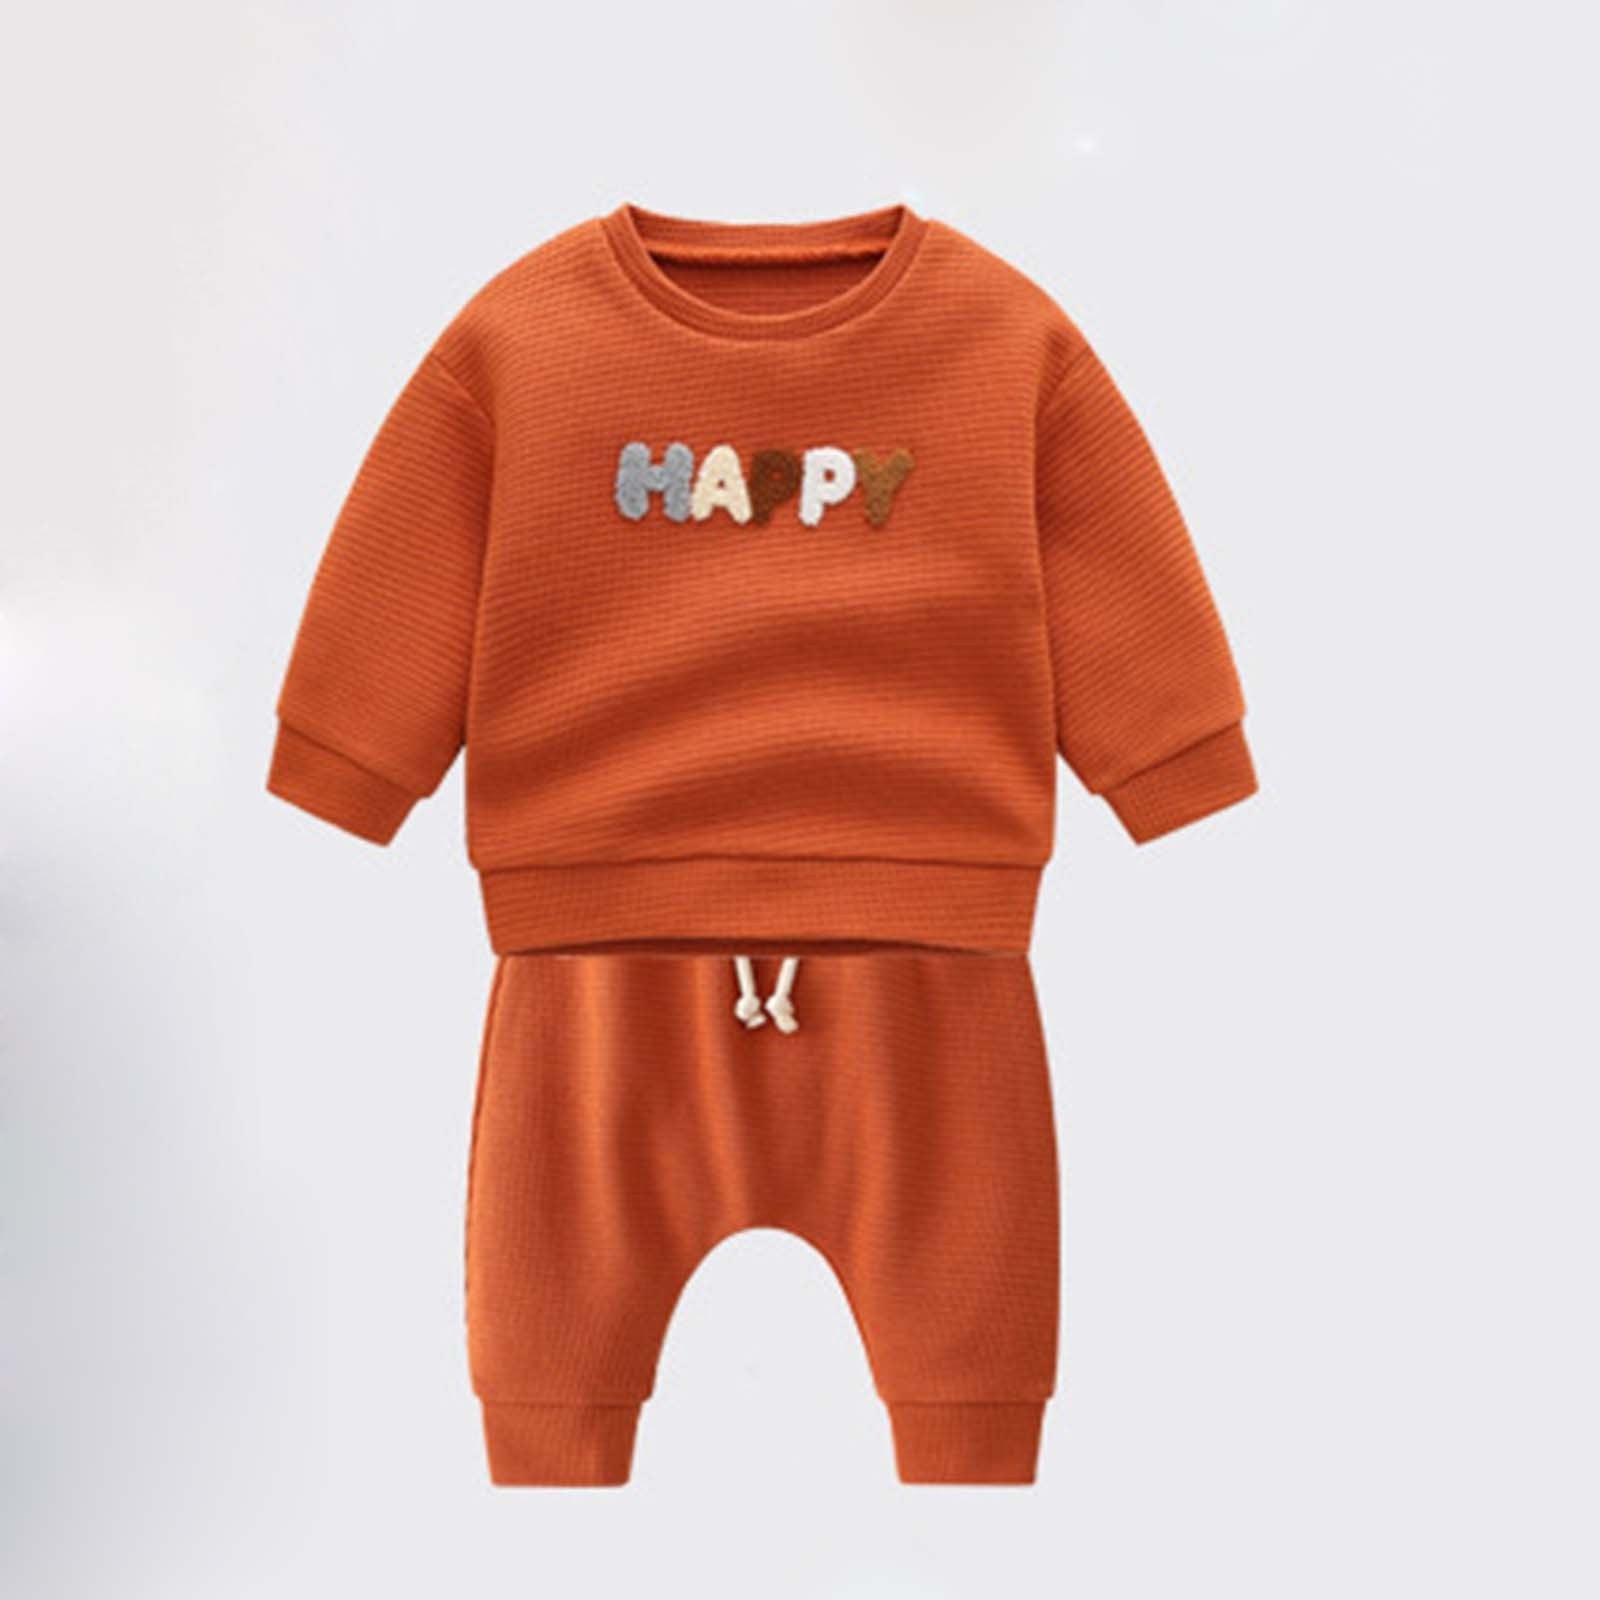 Infant Baby Girls Boys Autumn Winter Knit Letter Winter Track Pants 2pc outfit